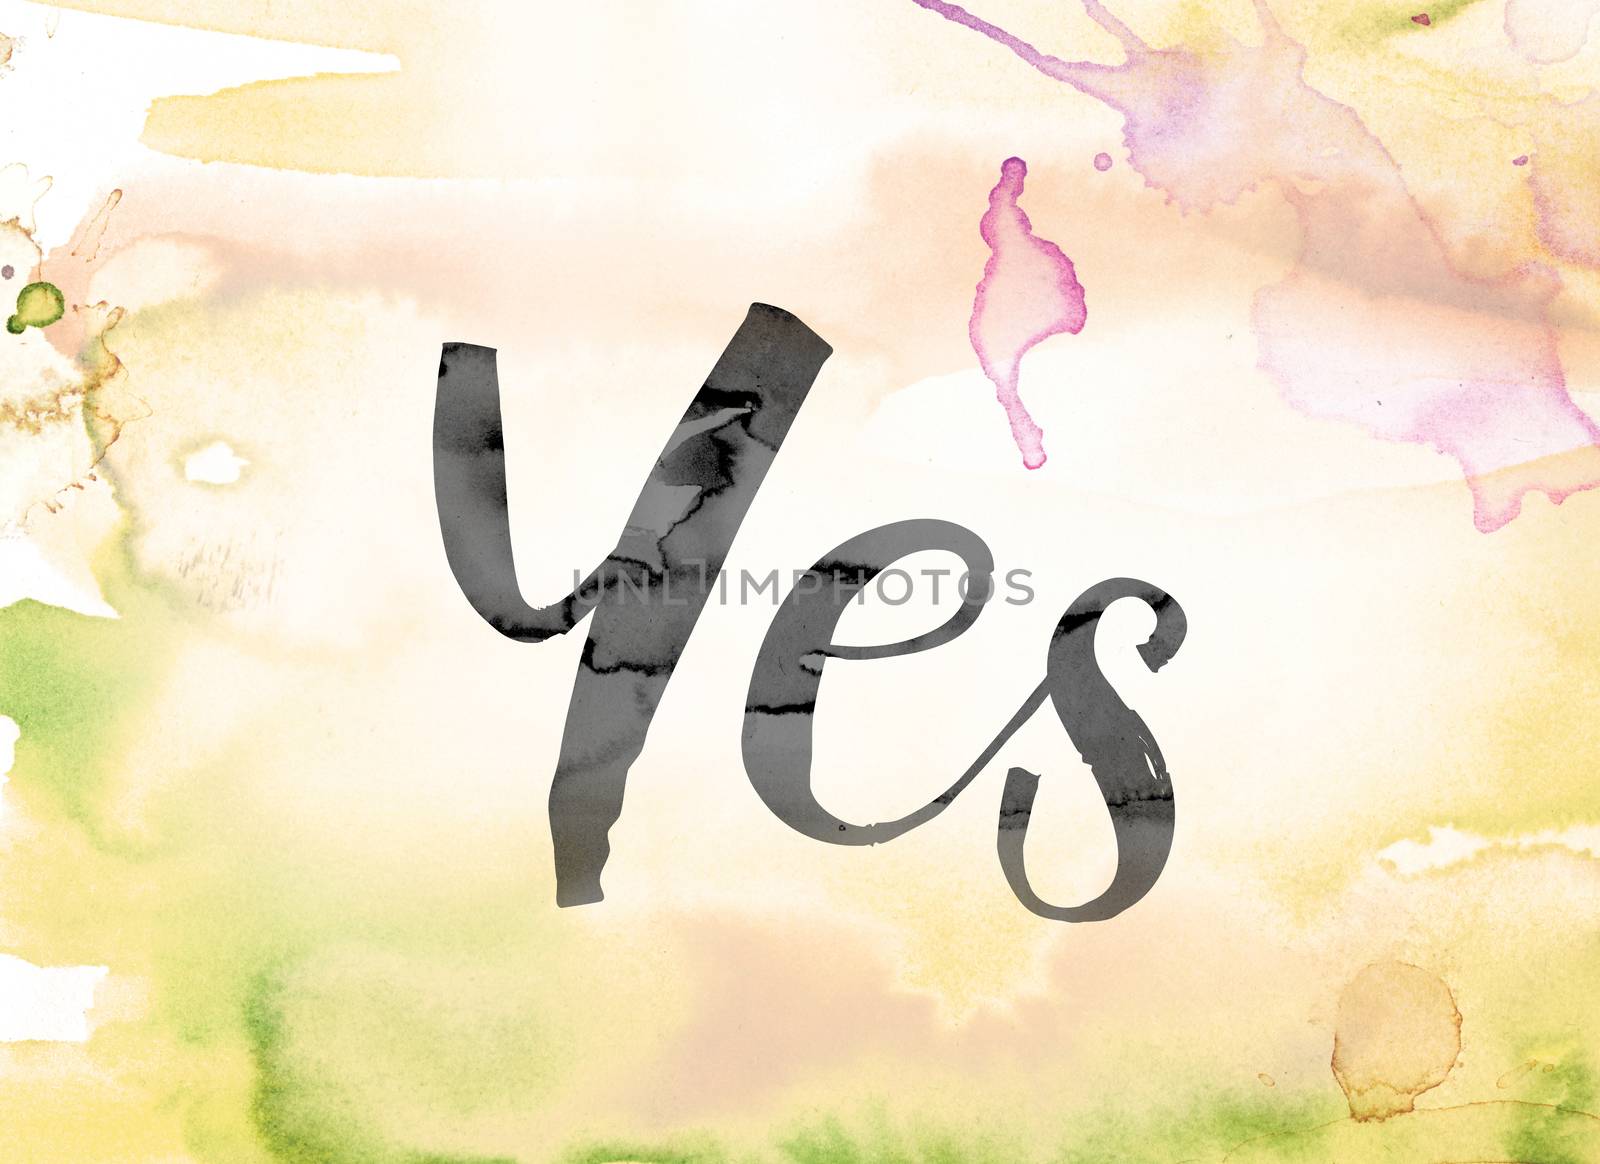 The word "Yes" painted in black ink over a colorful watercolor washed background concept and theme.